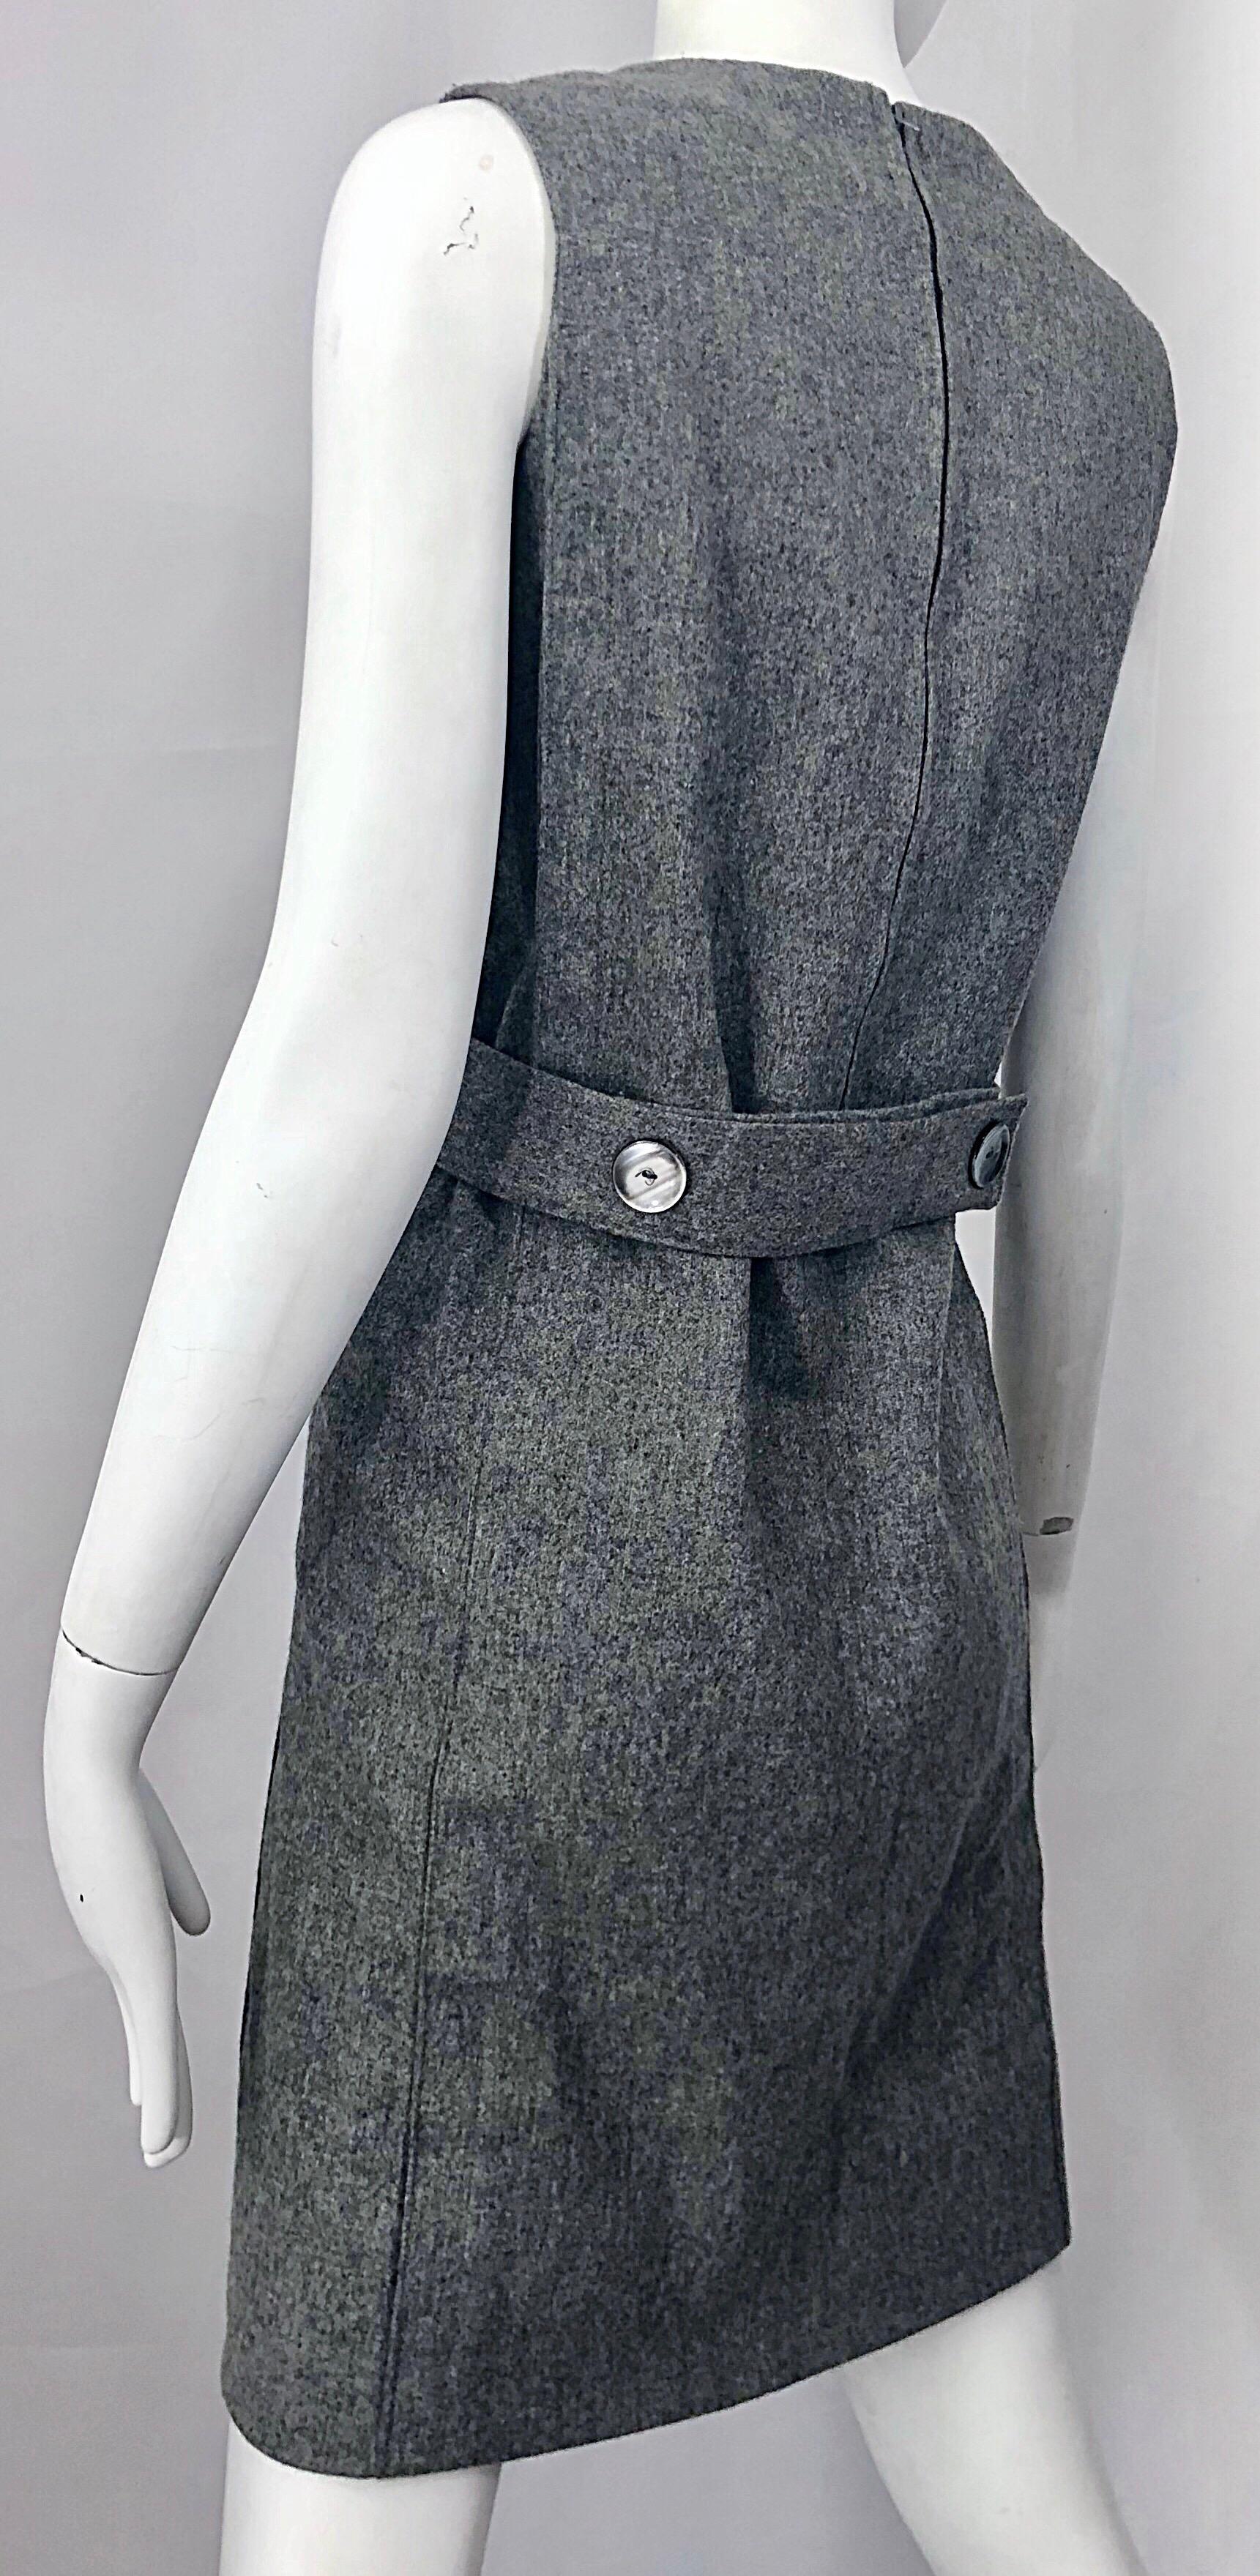 Chic 1960s Heather Gray Wool Sleeveless Vintage 60s Mod Shift Dress In Excellent Condition For Sale In San Diego, CA